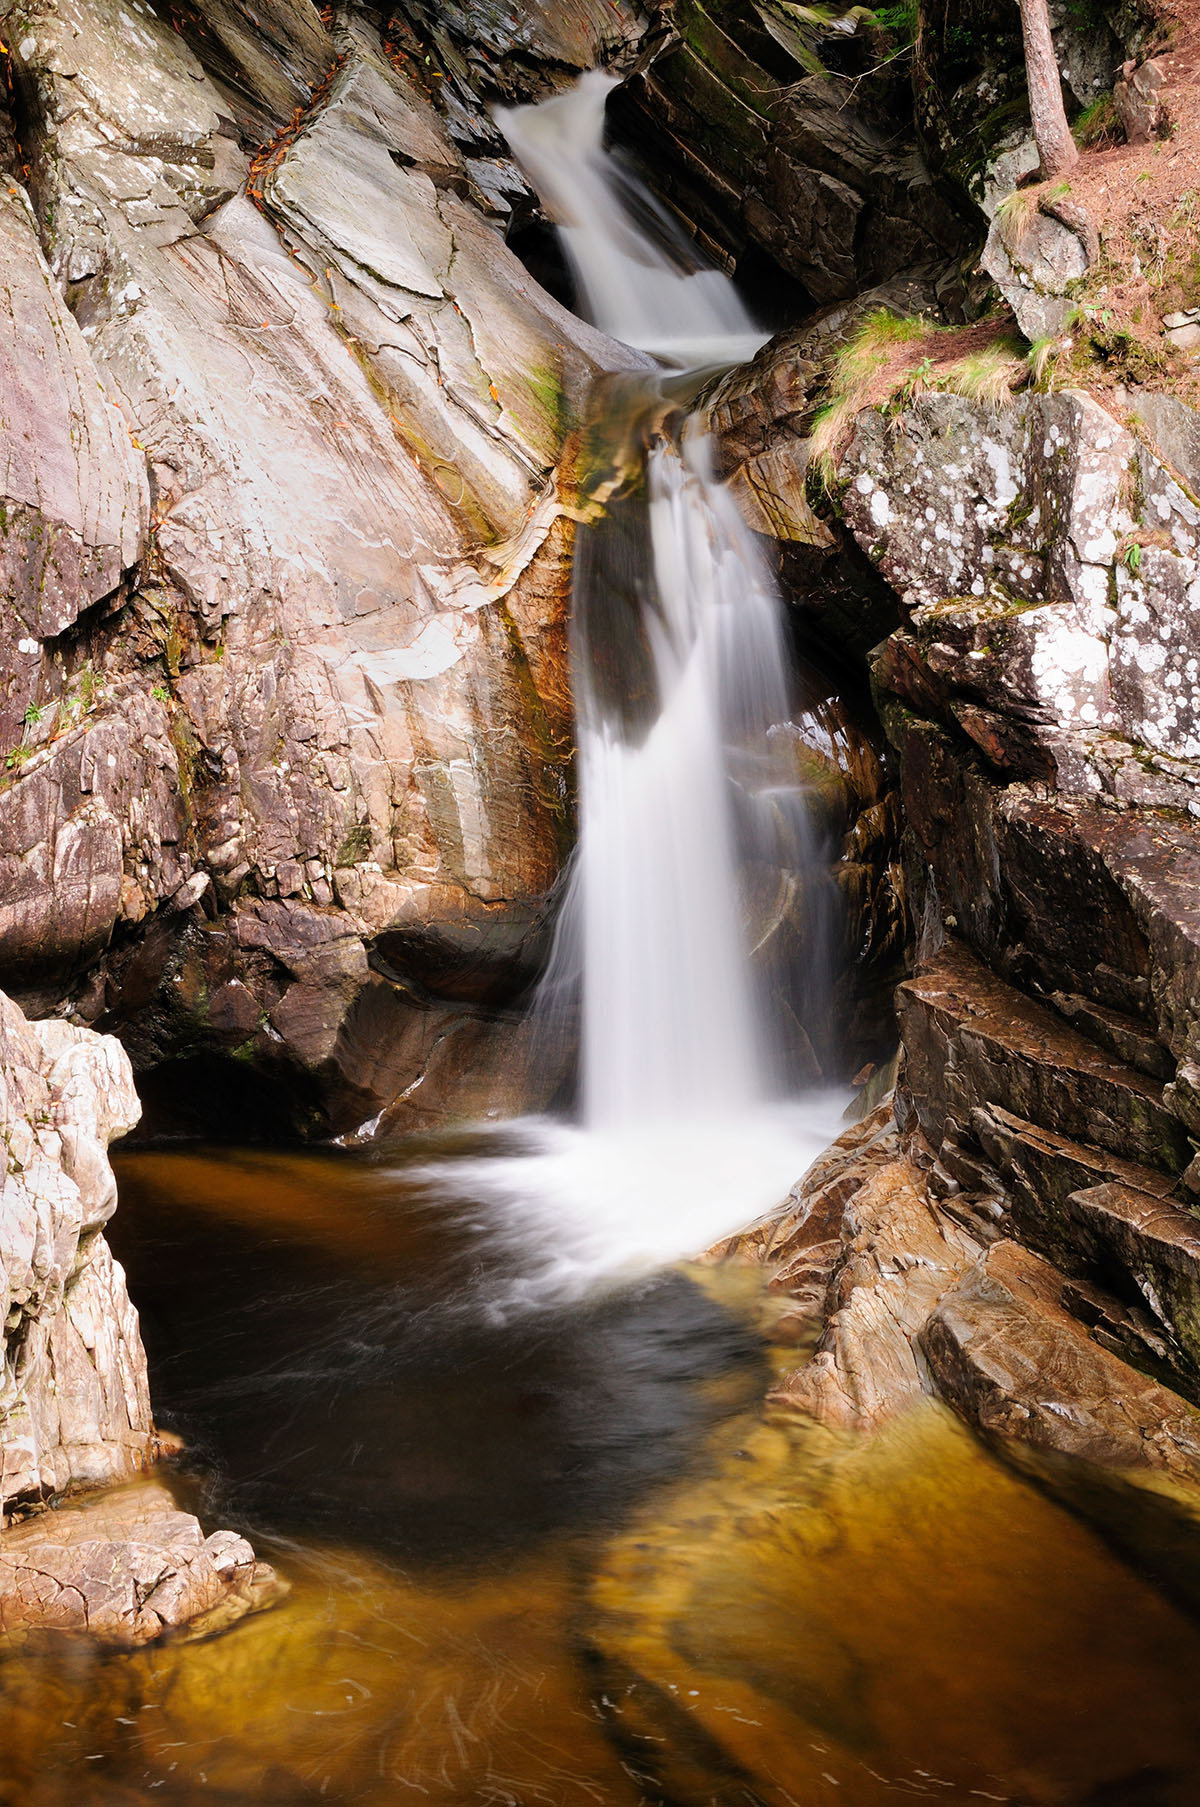 Waterfall photographed in slow motion, in a small gorge with smooth grey rocks on either side and dark pool at the base